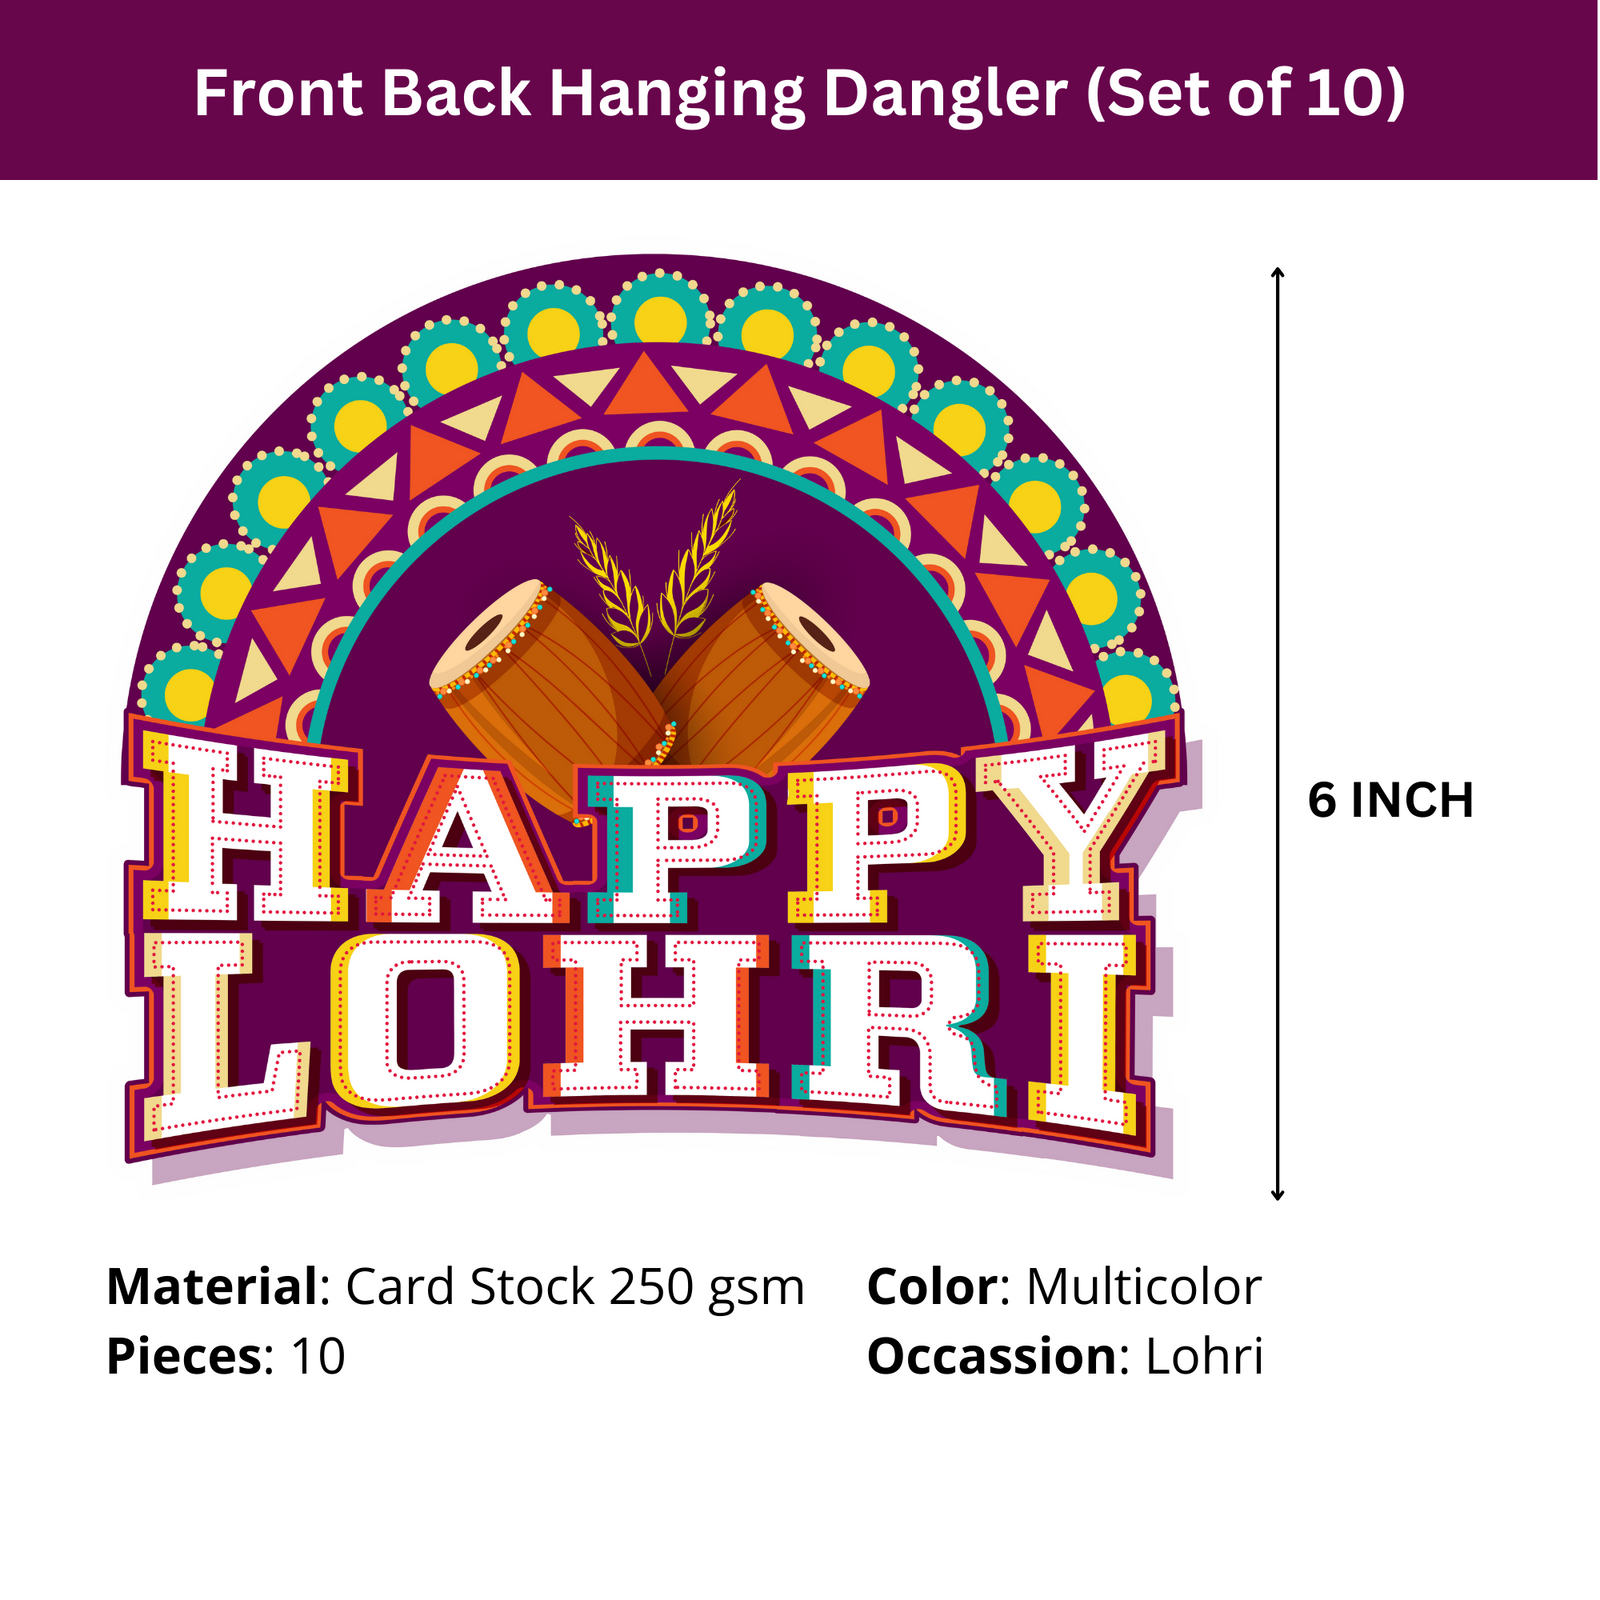 Get Ready to Have a Good Time This Lohri with Amazing Gift Ideas from Frinza